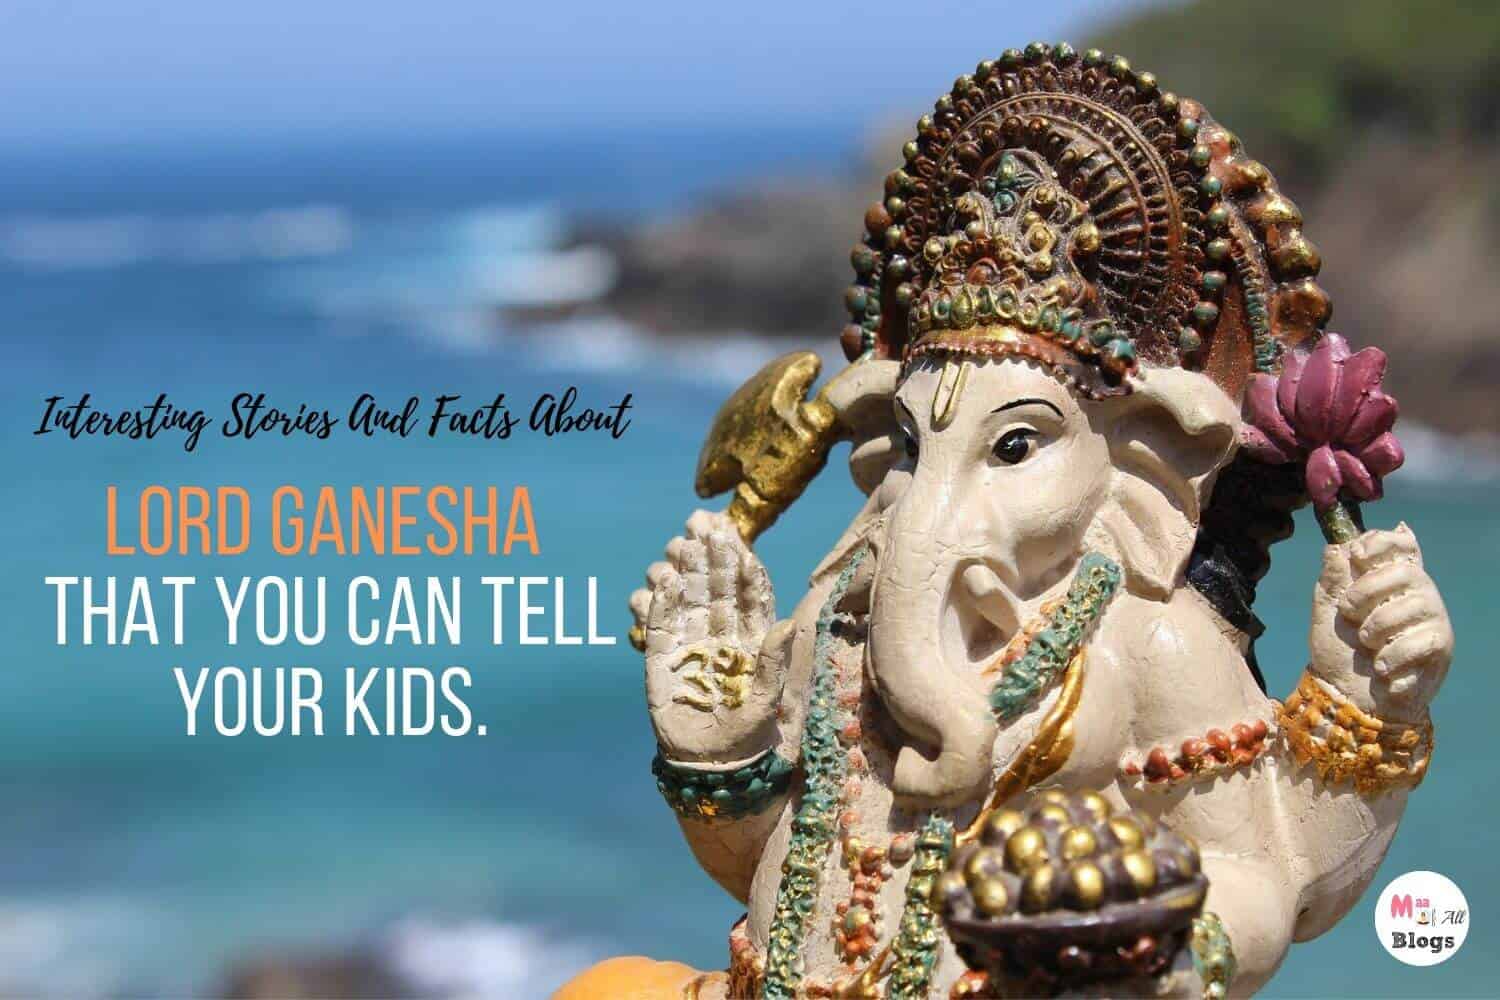 Interesting Stories And Fact about Lord Ganesha